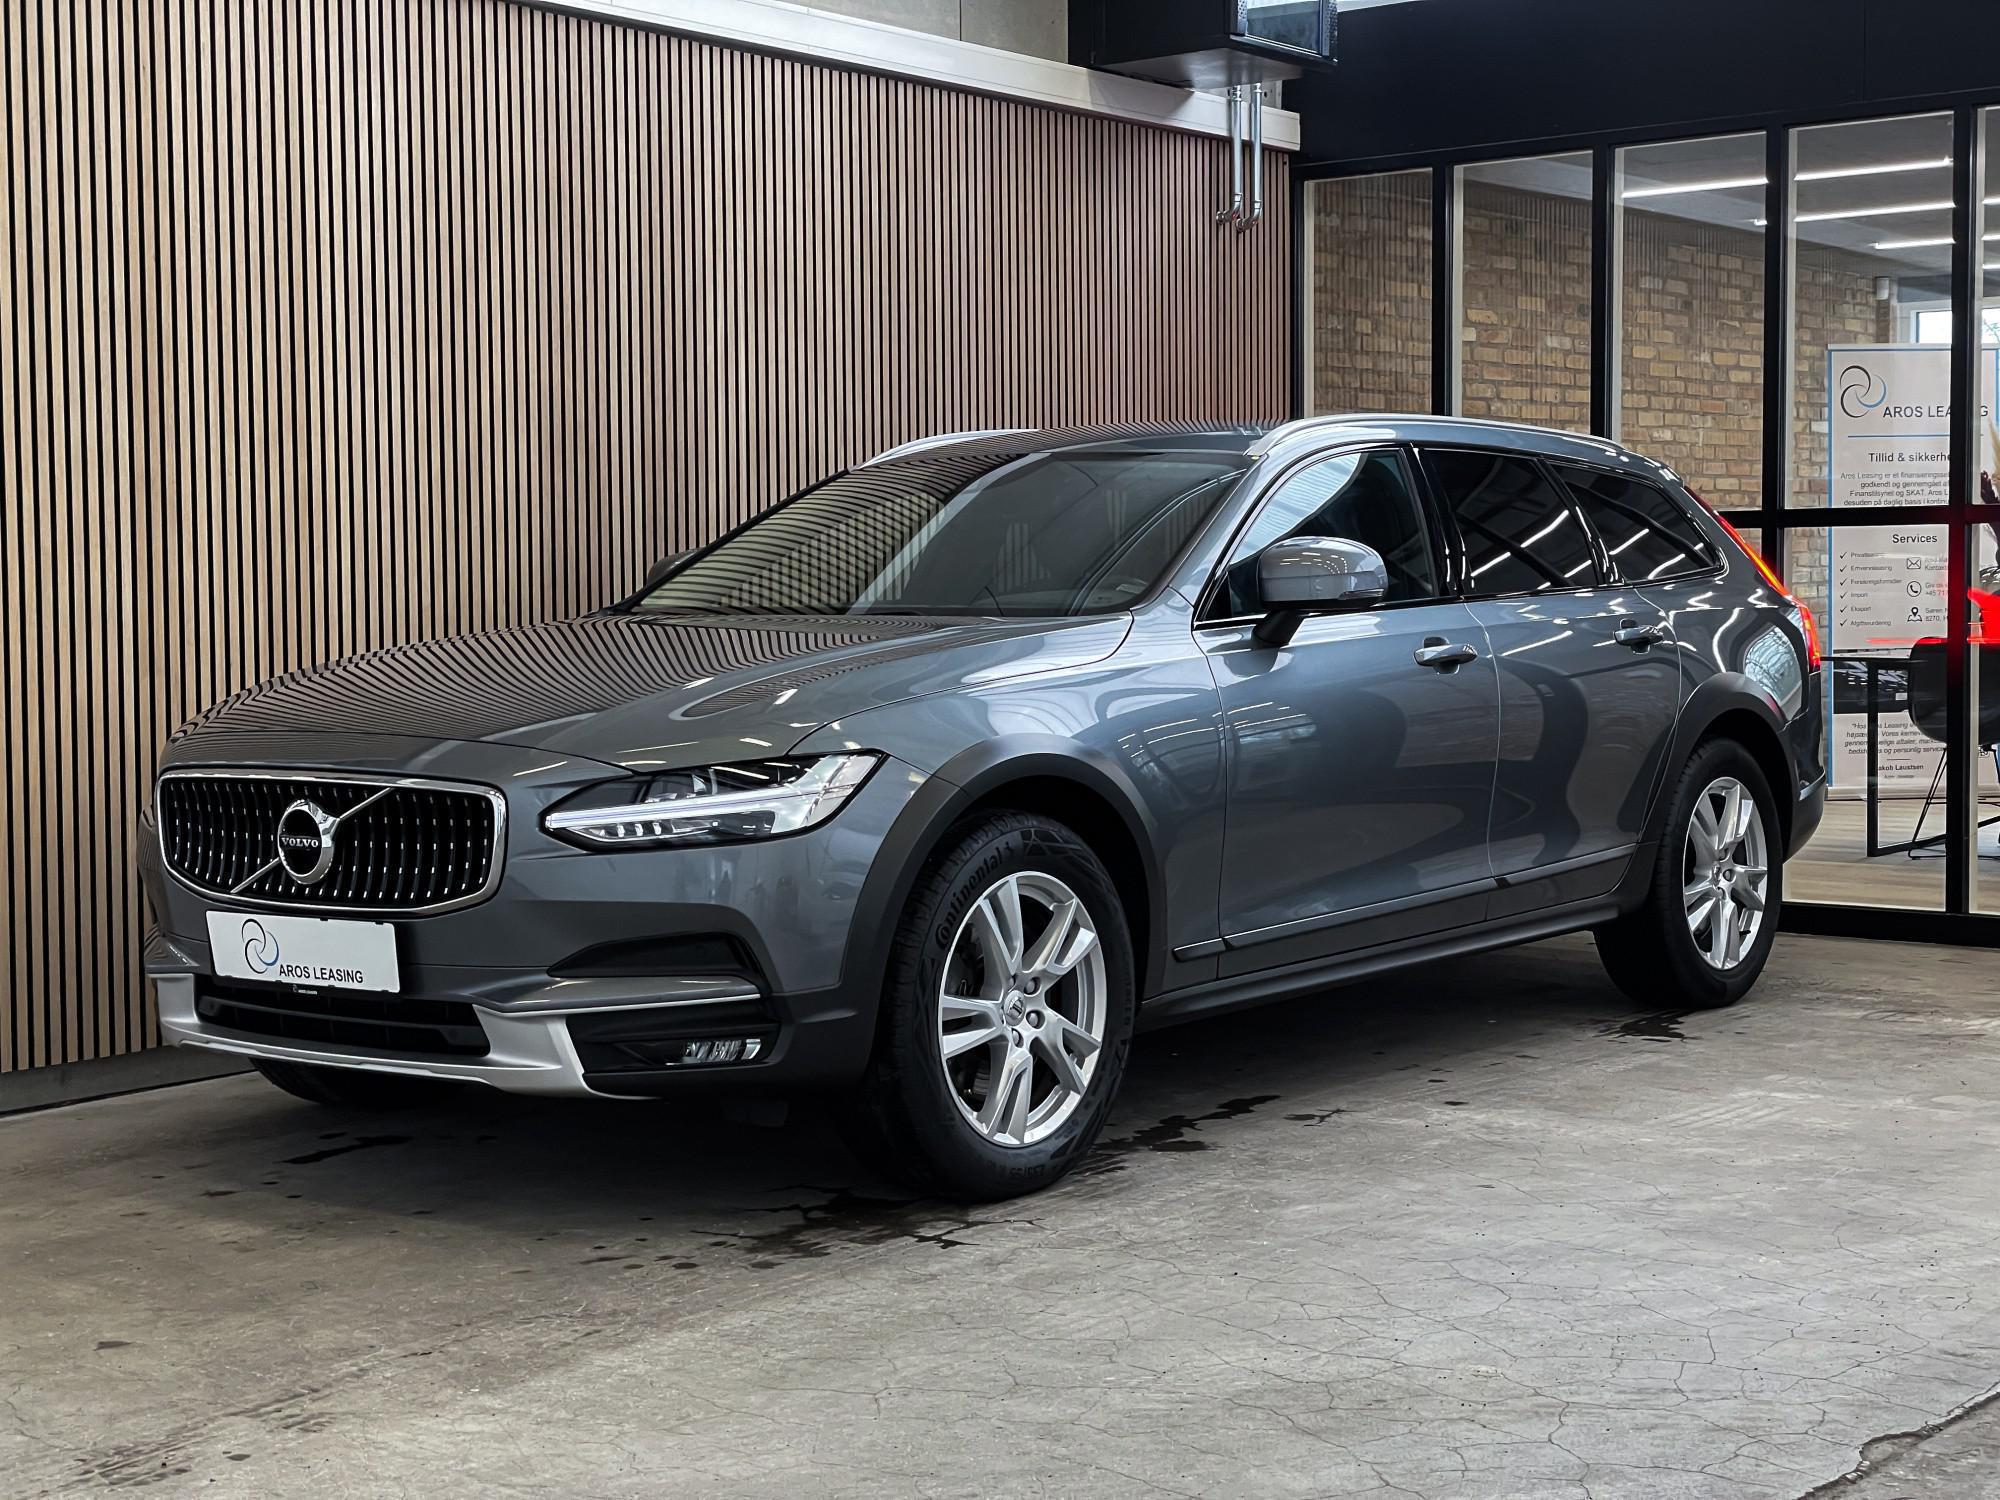 flexleasing-volvo-v90-cross-country-20-d4-190-hk-awd-automatic-findleasing